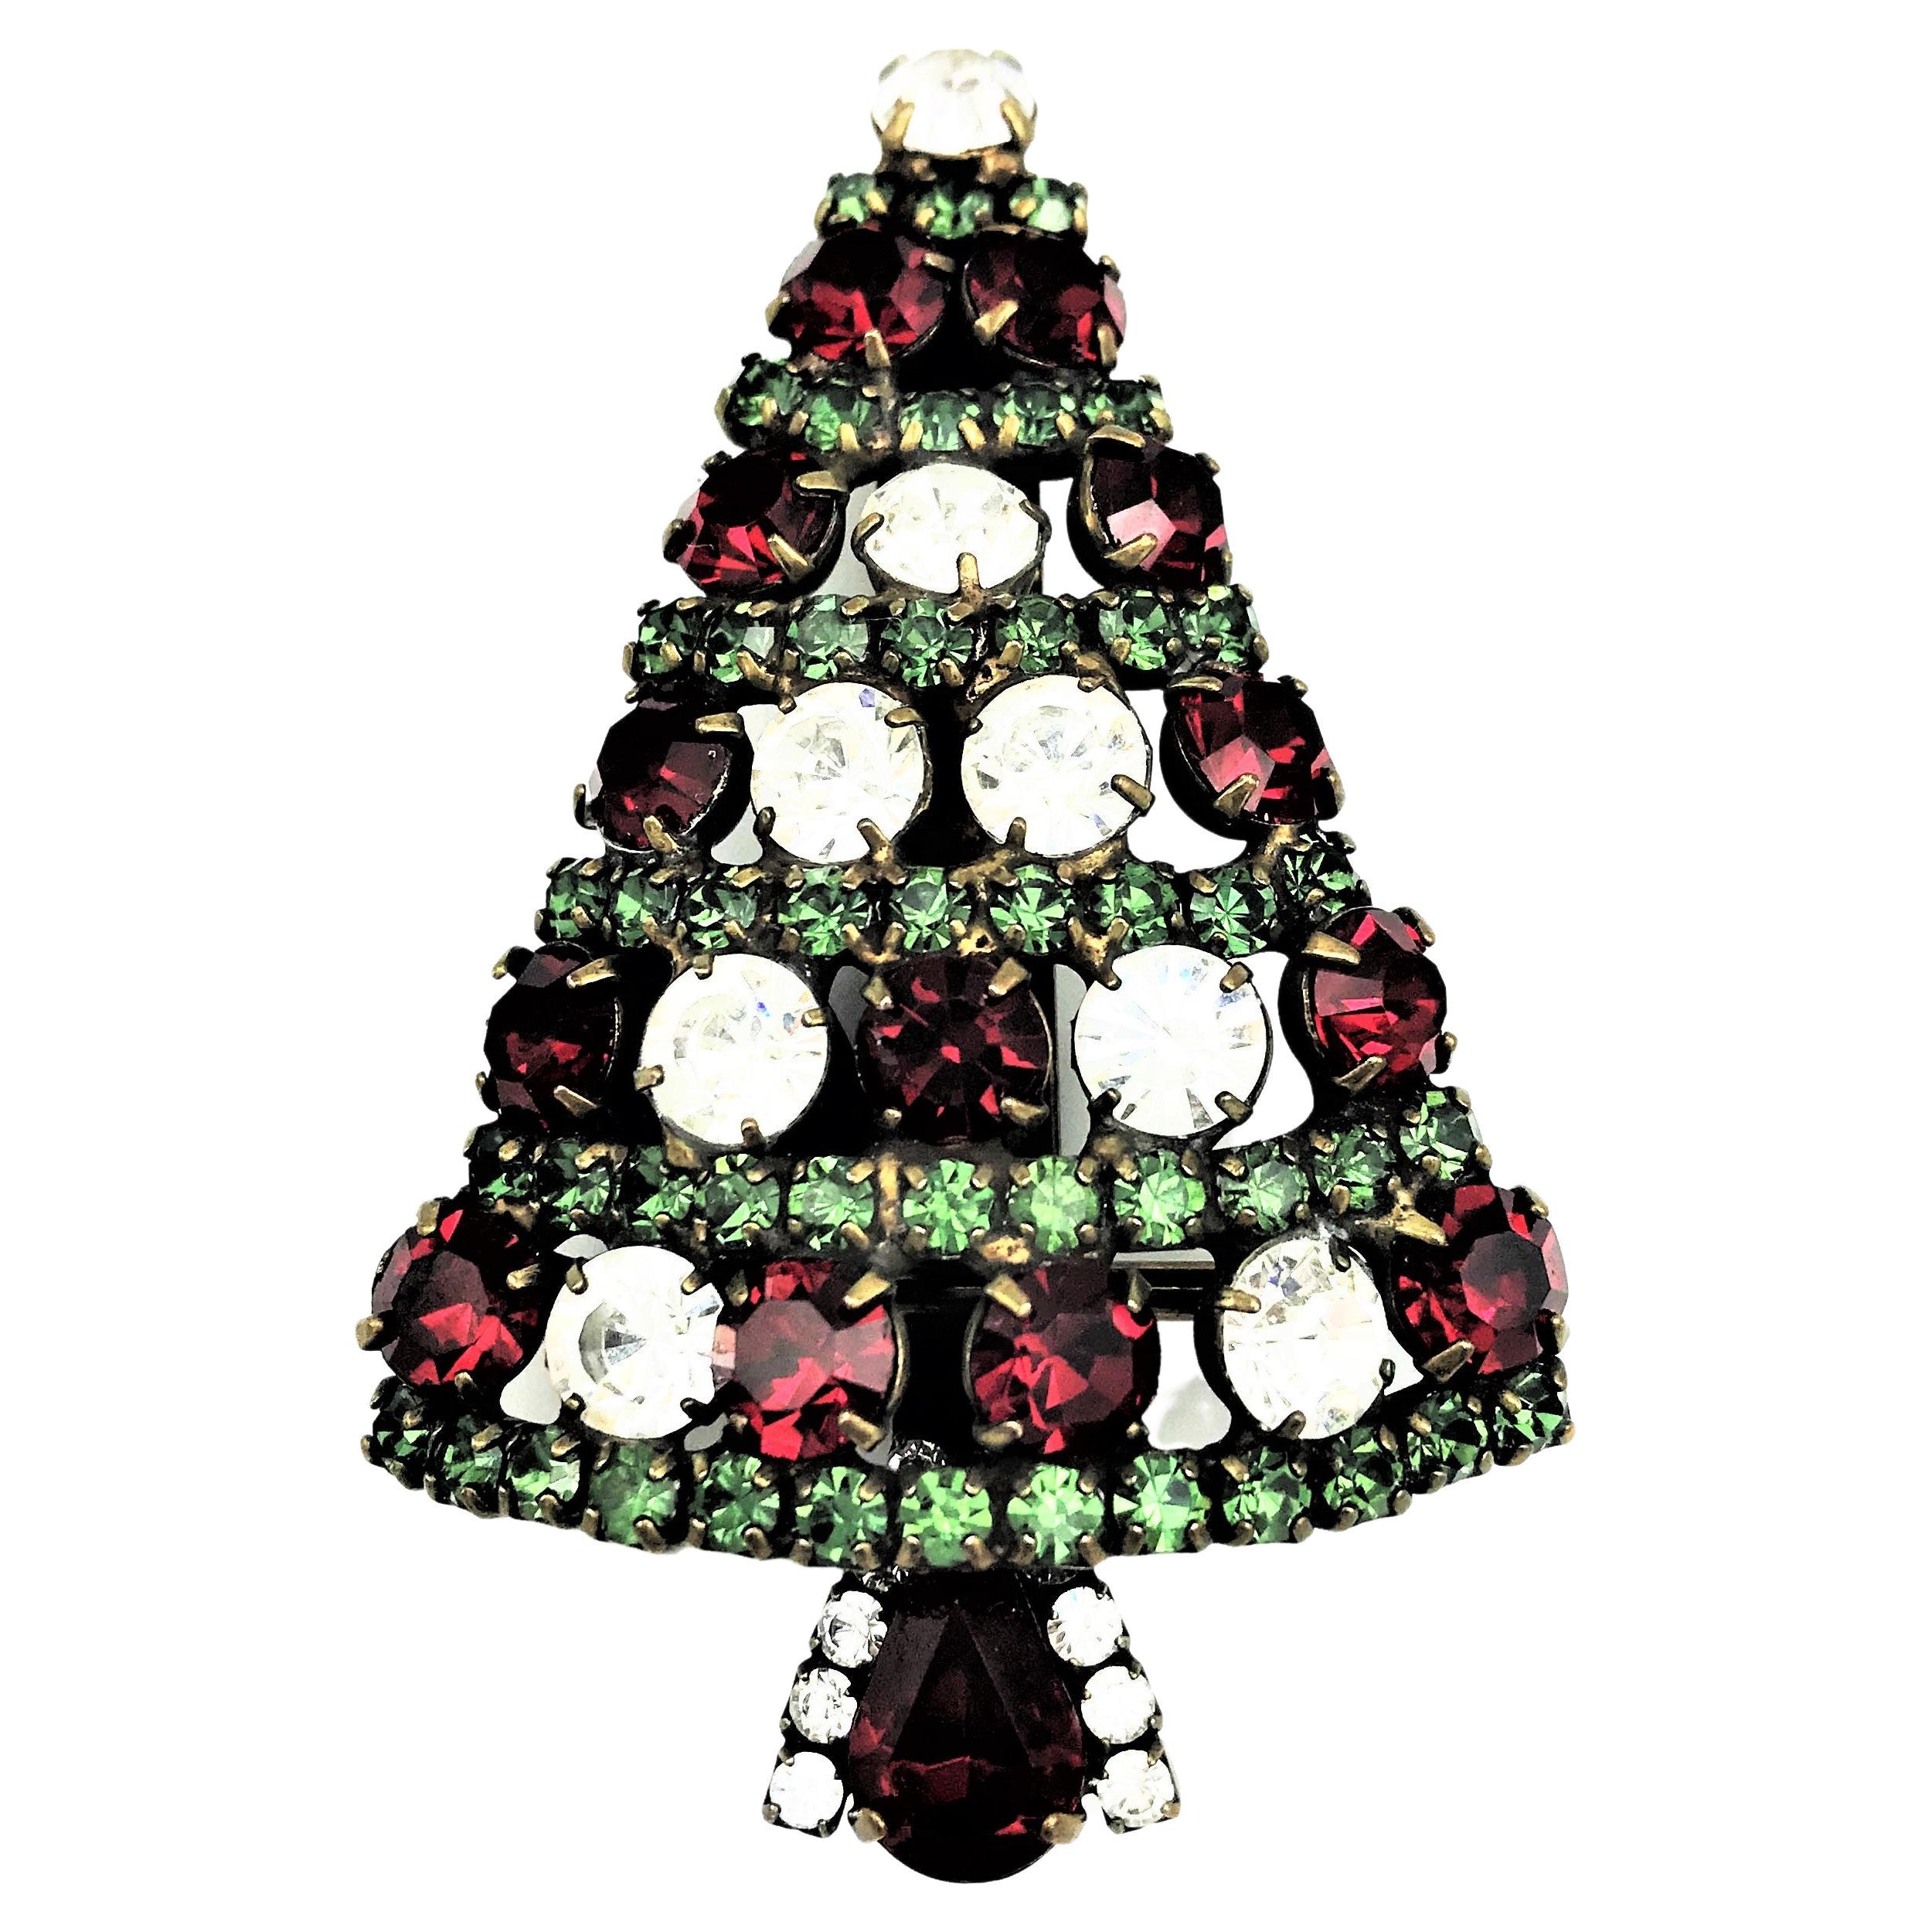 Christmas is coming soon!       Who wouldn't want to adorn themselves with a Christmas tree brooch.

This sparkling treasure is designed and manufactured in California by Dorothy Bauer. She expresses her love of color in a witty and humorous